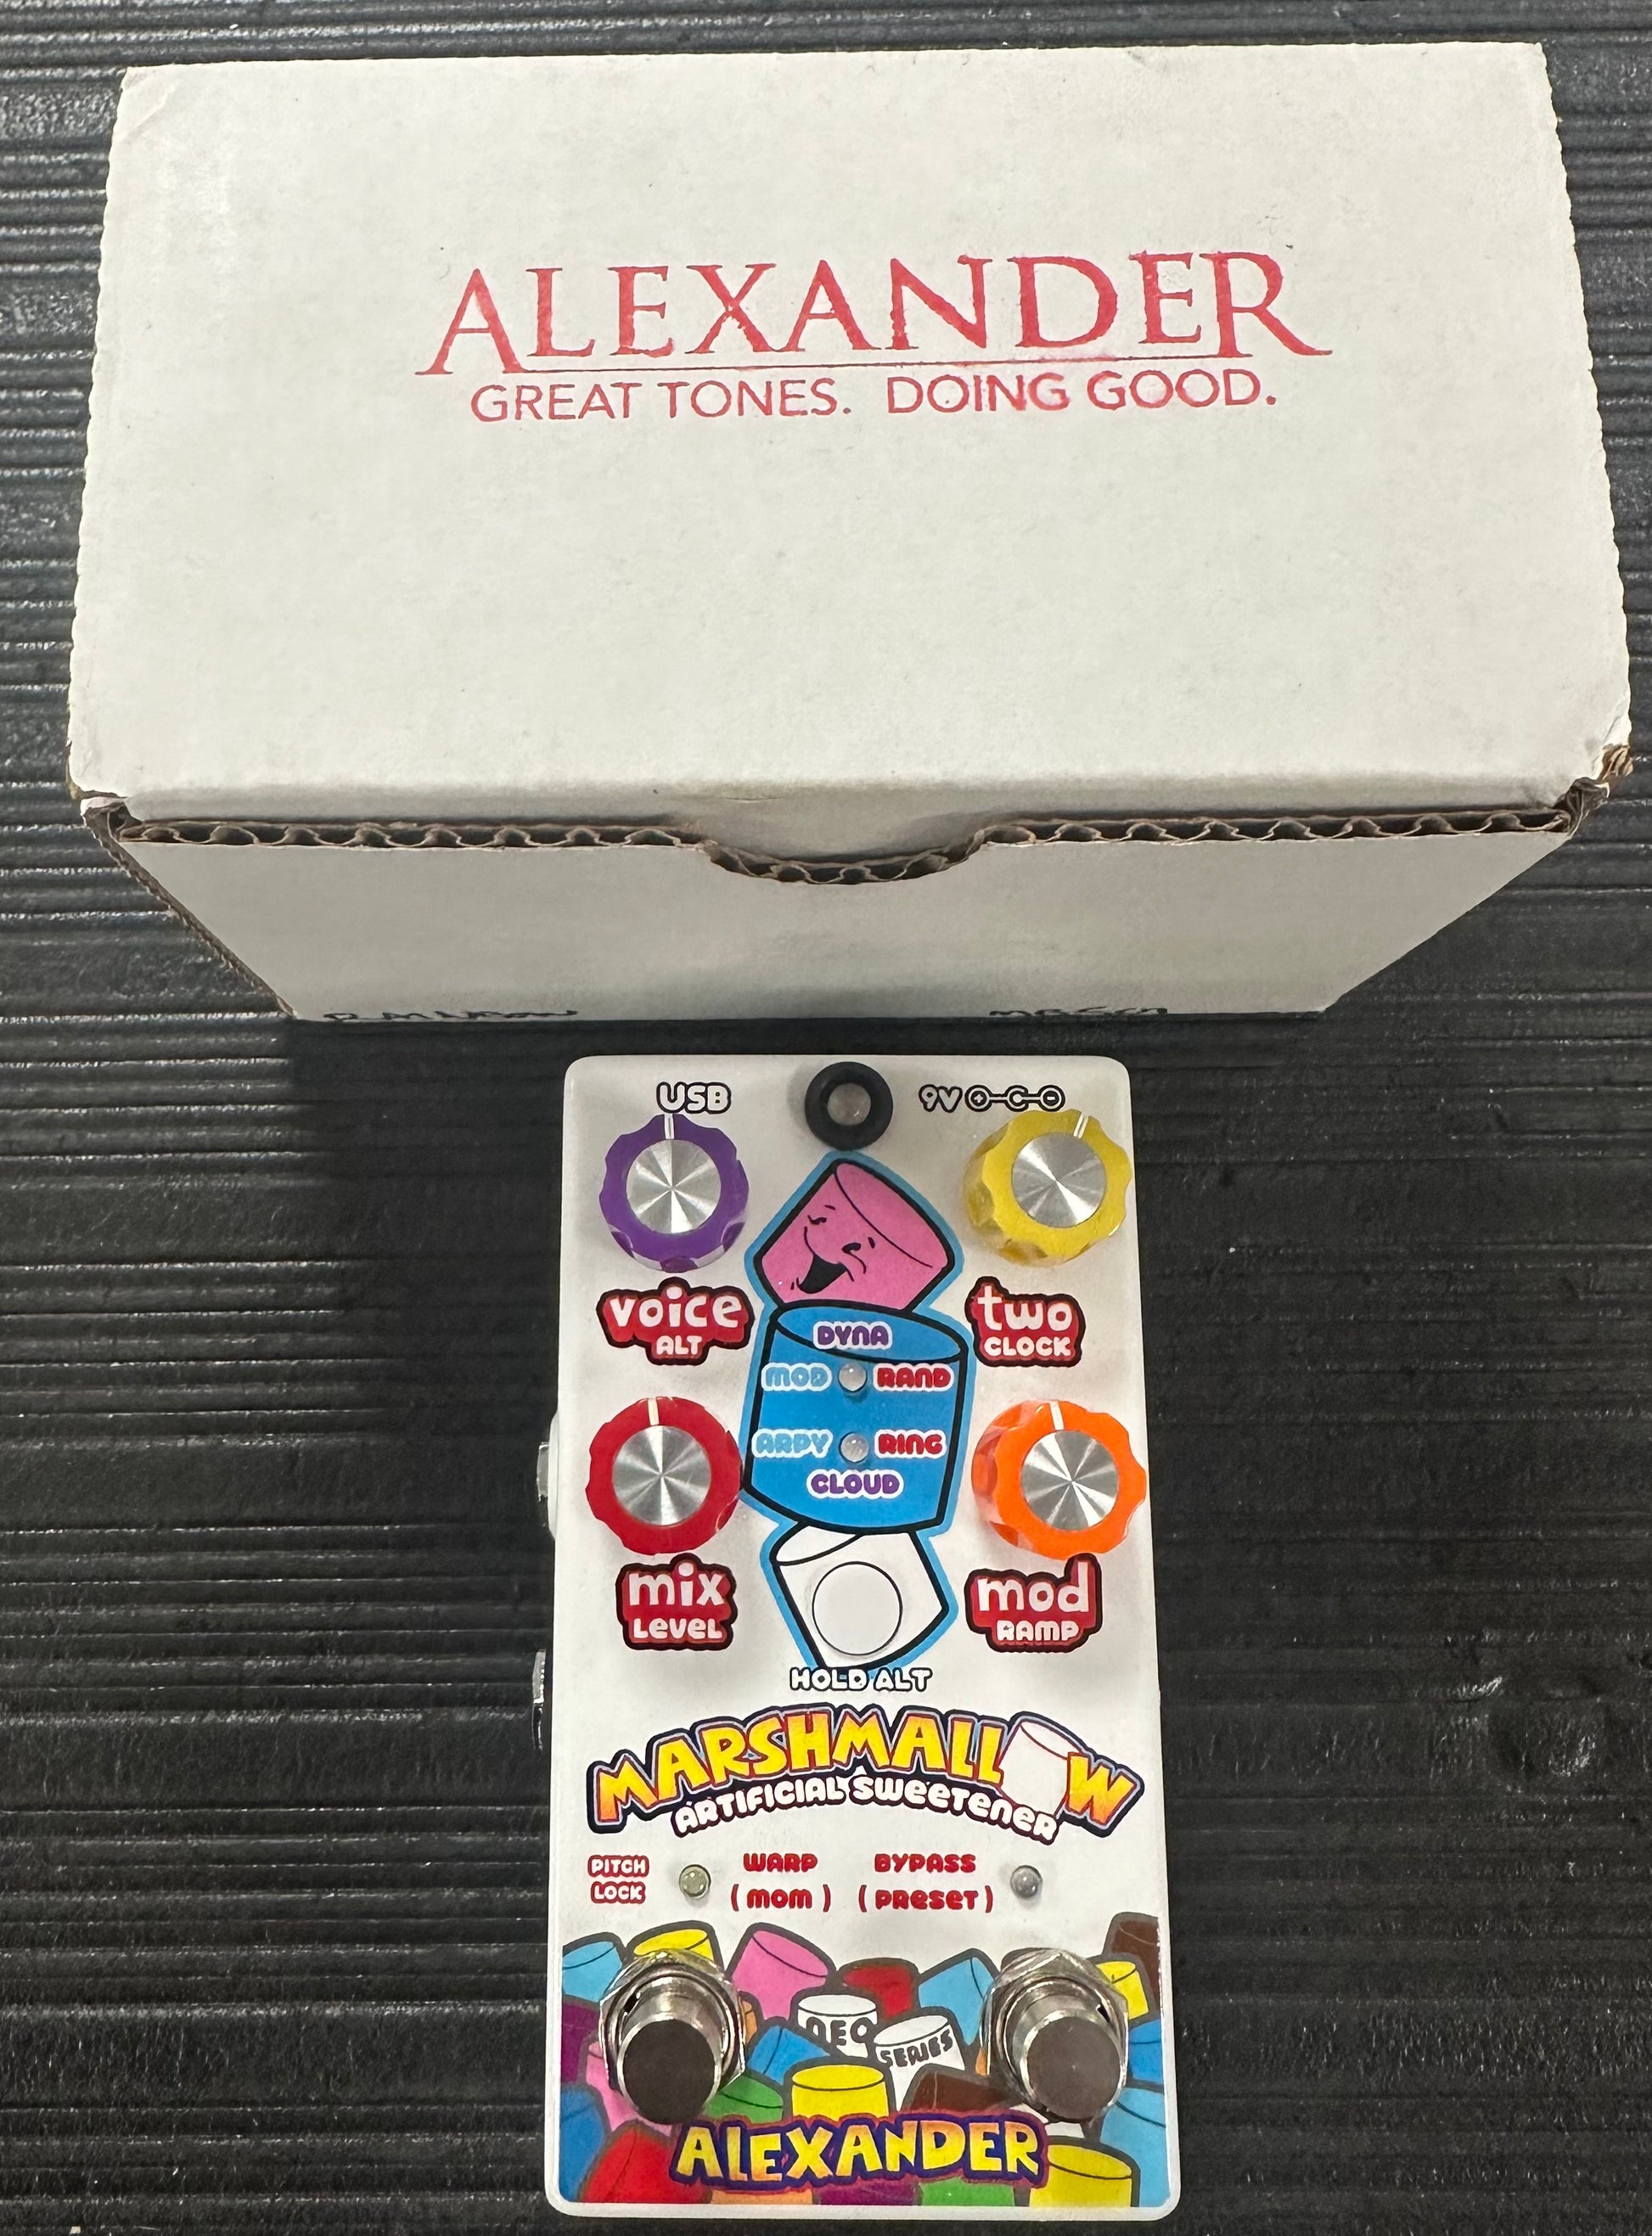 Top with box of Used Alexander Pedals Marshmallow Octave Pedal w/box TSS3798